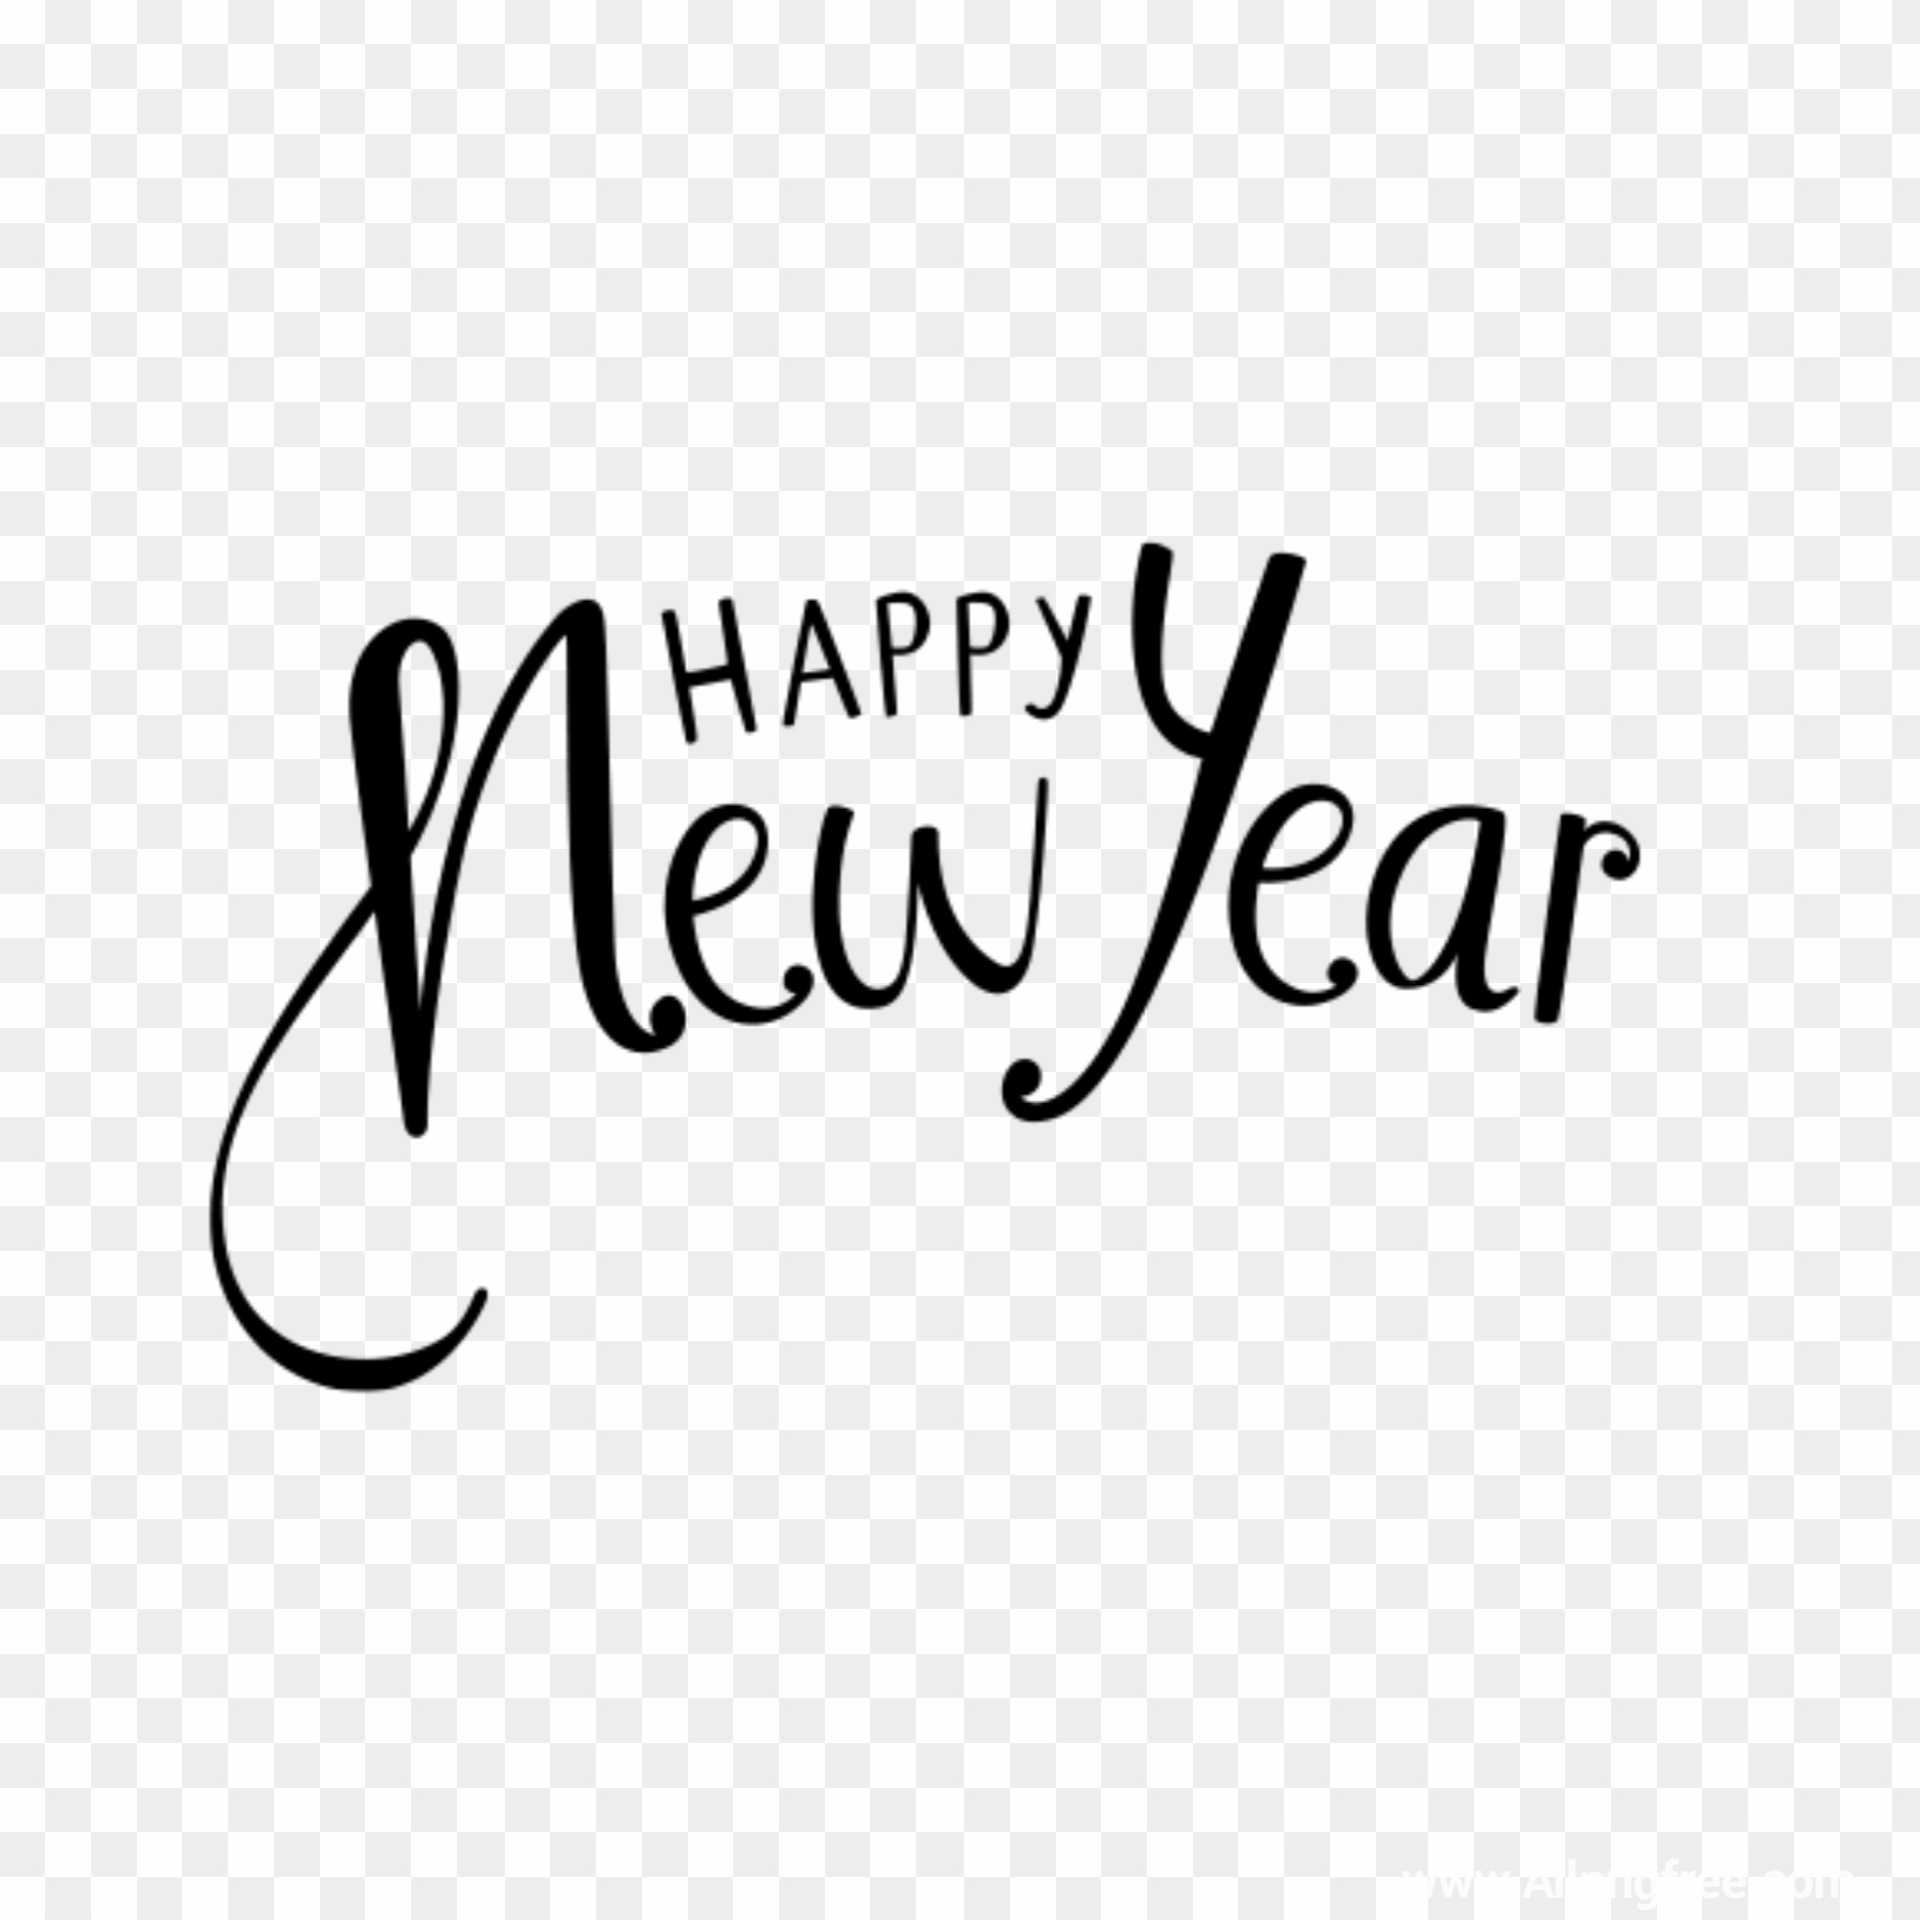 Happy New year stylish text PNG images